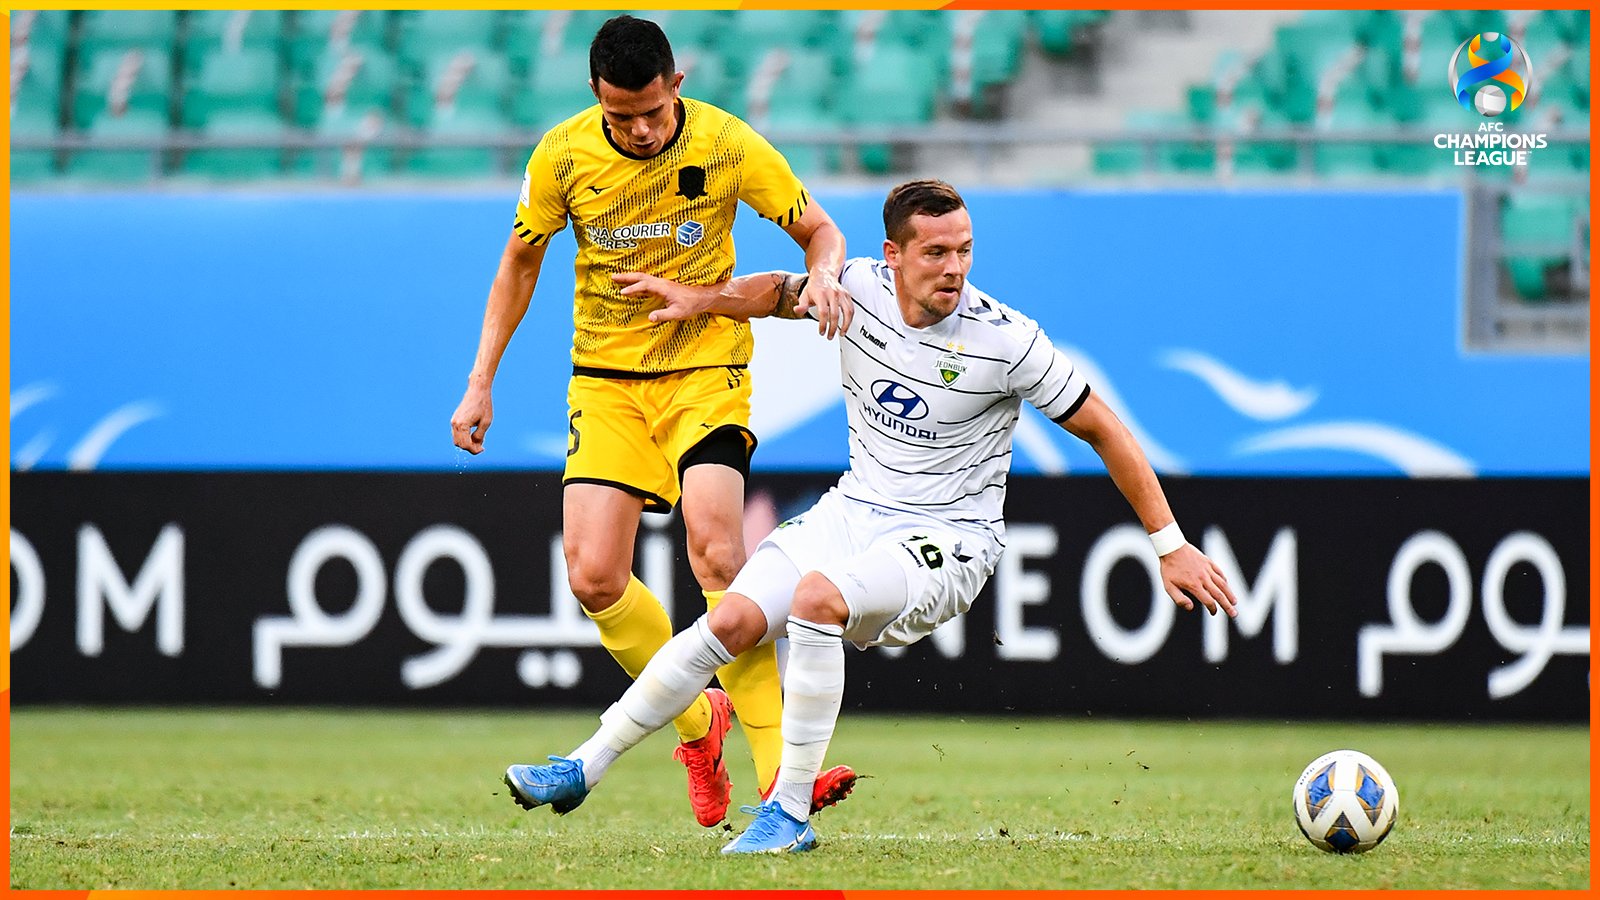 Acl21 Ft Trfcstags 0 4 Jeonbuk Hyundai Motors Jeonbuk Strengthen Their Hold On Spot Of Group H With A Second Consecutive Victory Acl21 Tamvjbh T Co Opajfqgpzw